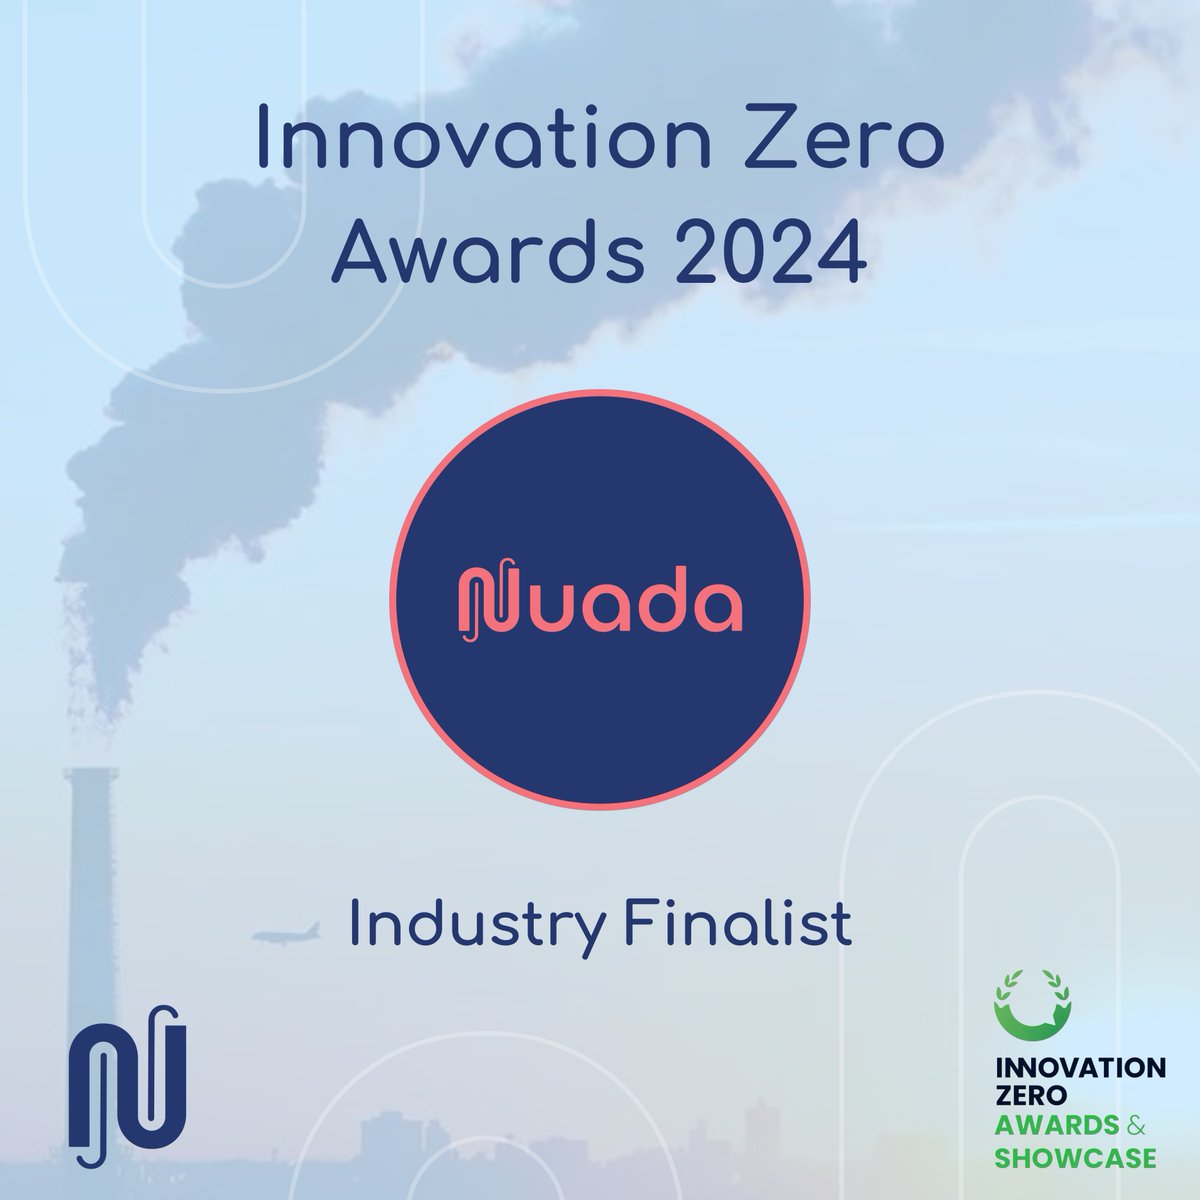 Nuada has been nominated AGAIN for another #innovation award! This time we are in the Industry category at the Innovation Zero Awards 🏆 We will also take part at the conference! Nuada will be exhibiting from booth H33 and speaking at the Innovation Showcase! Come say hello 👋